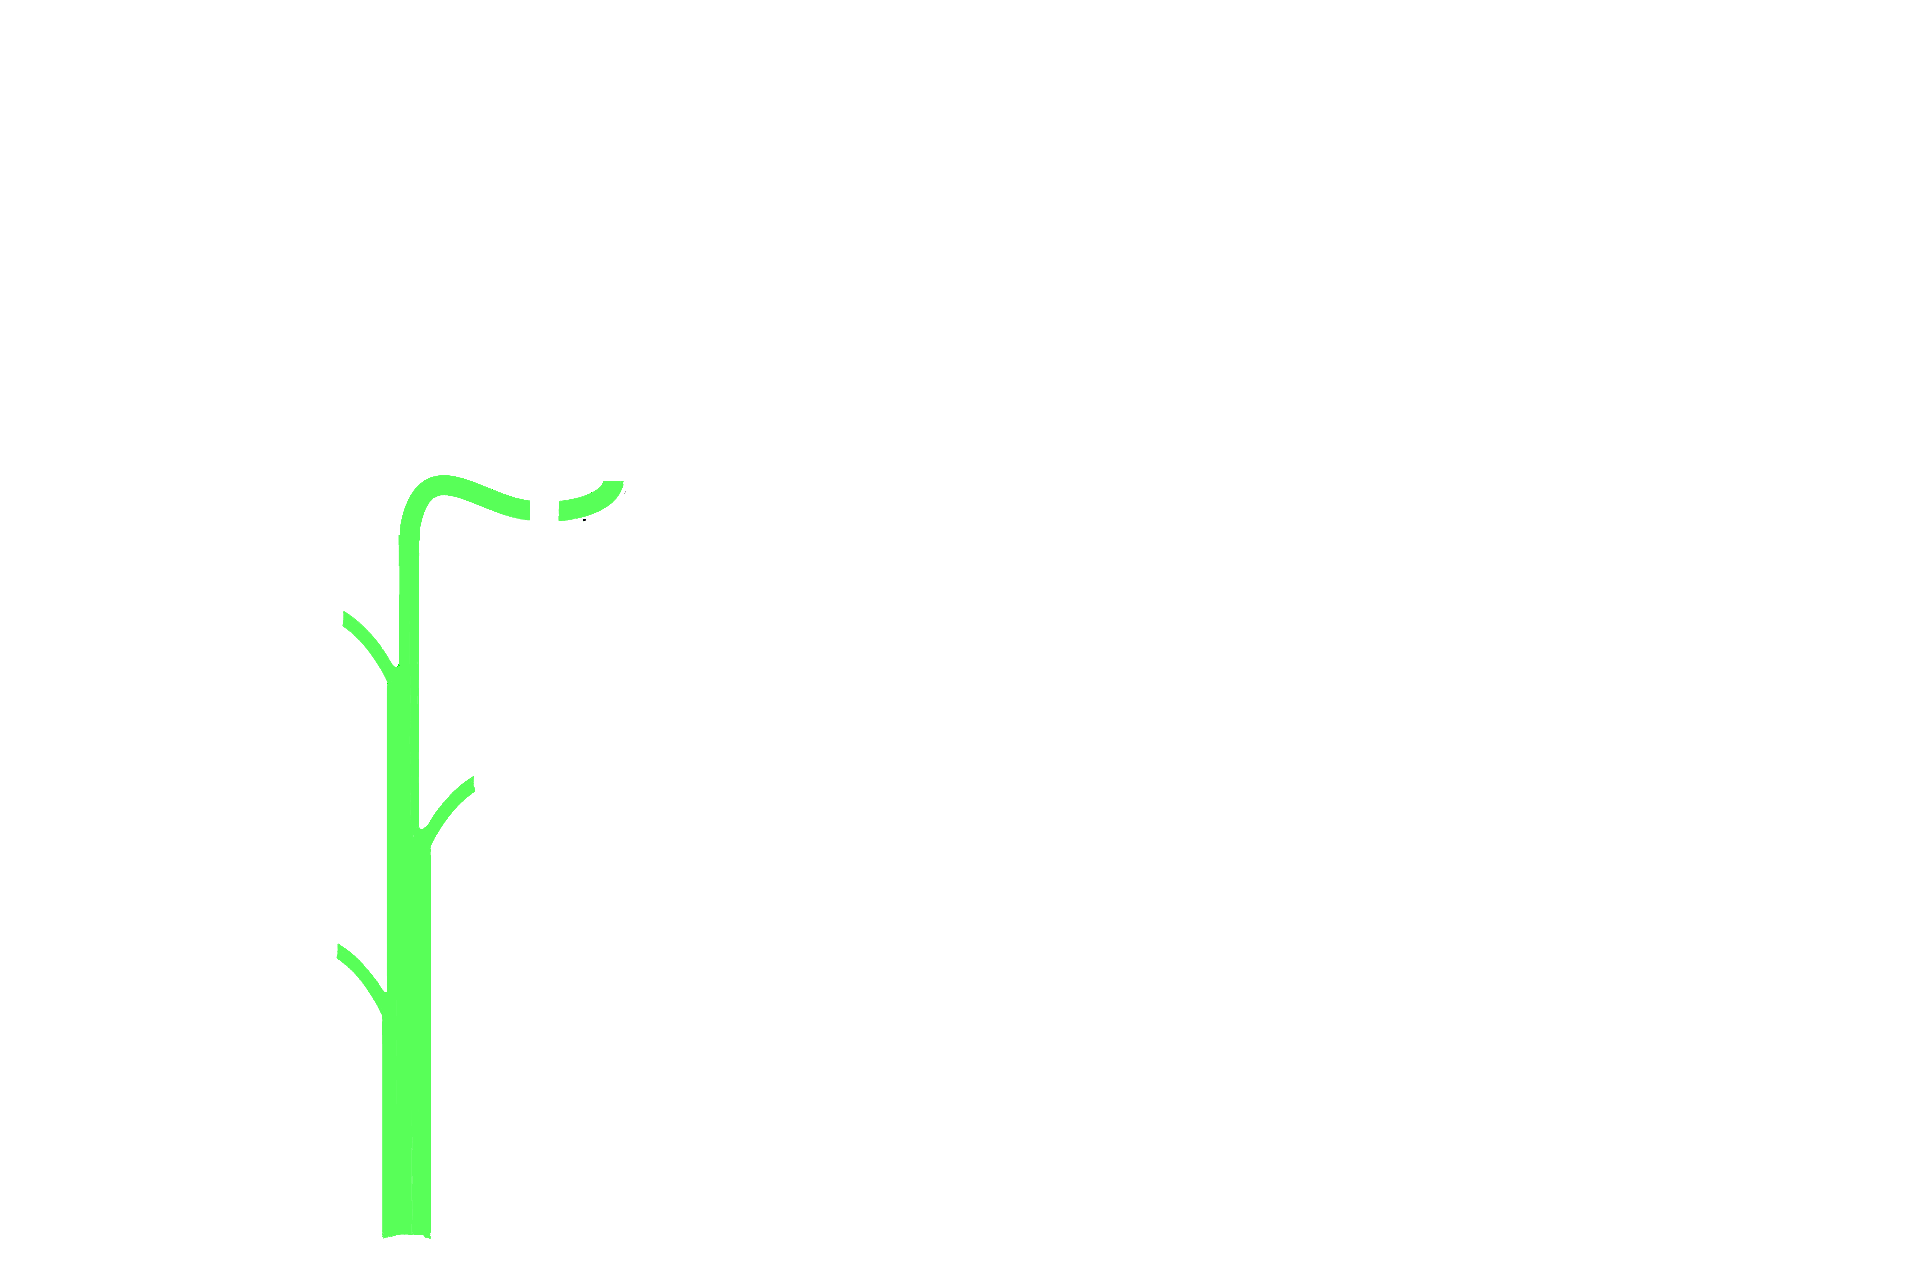 Collecting passageways > <p>Urine passes out of the nephron into a series of collecting tubules, consisting of connecting tubules, collecting ducts and papillary ducts.</p>
